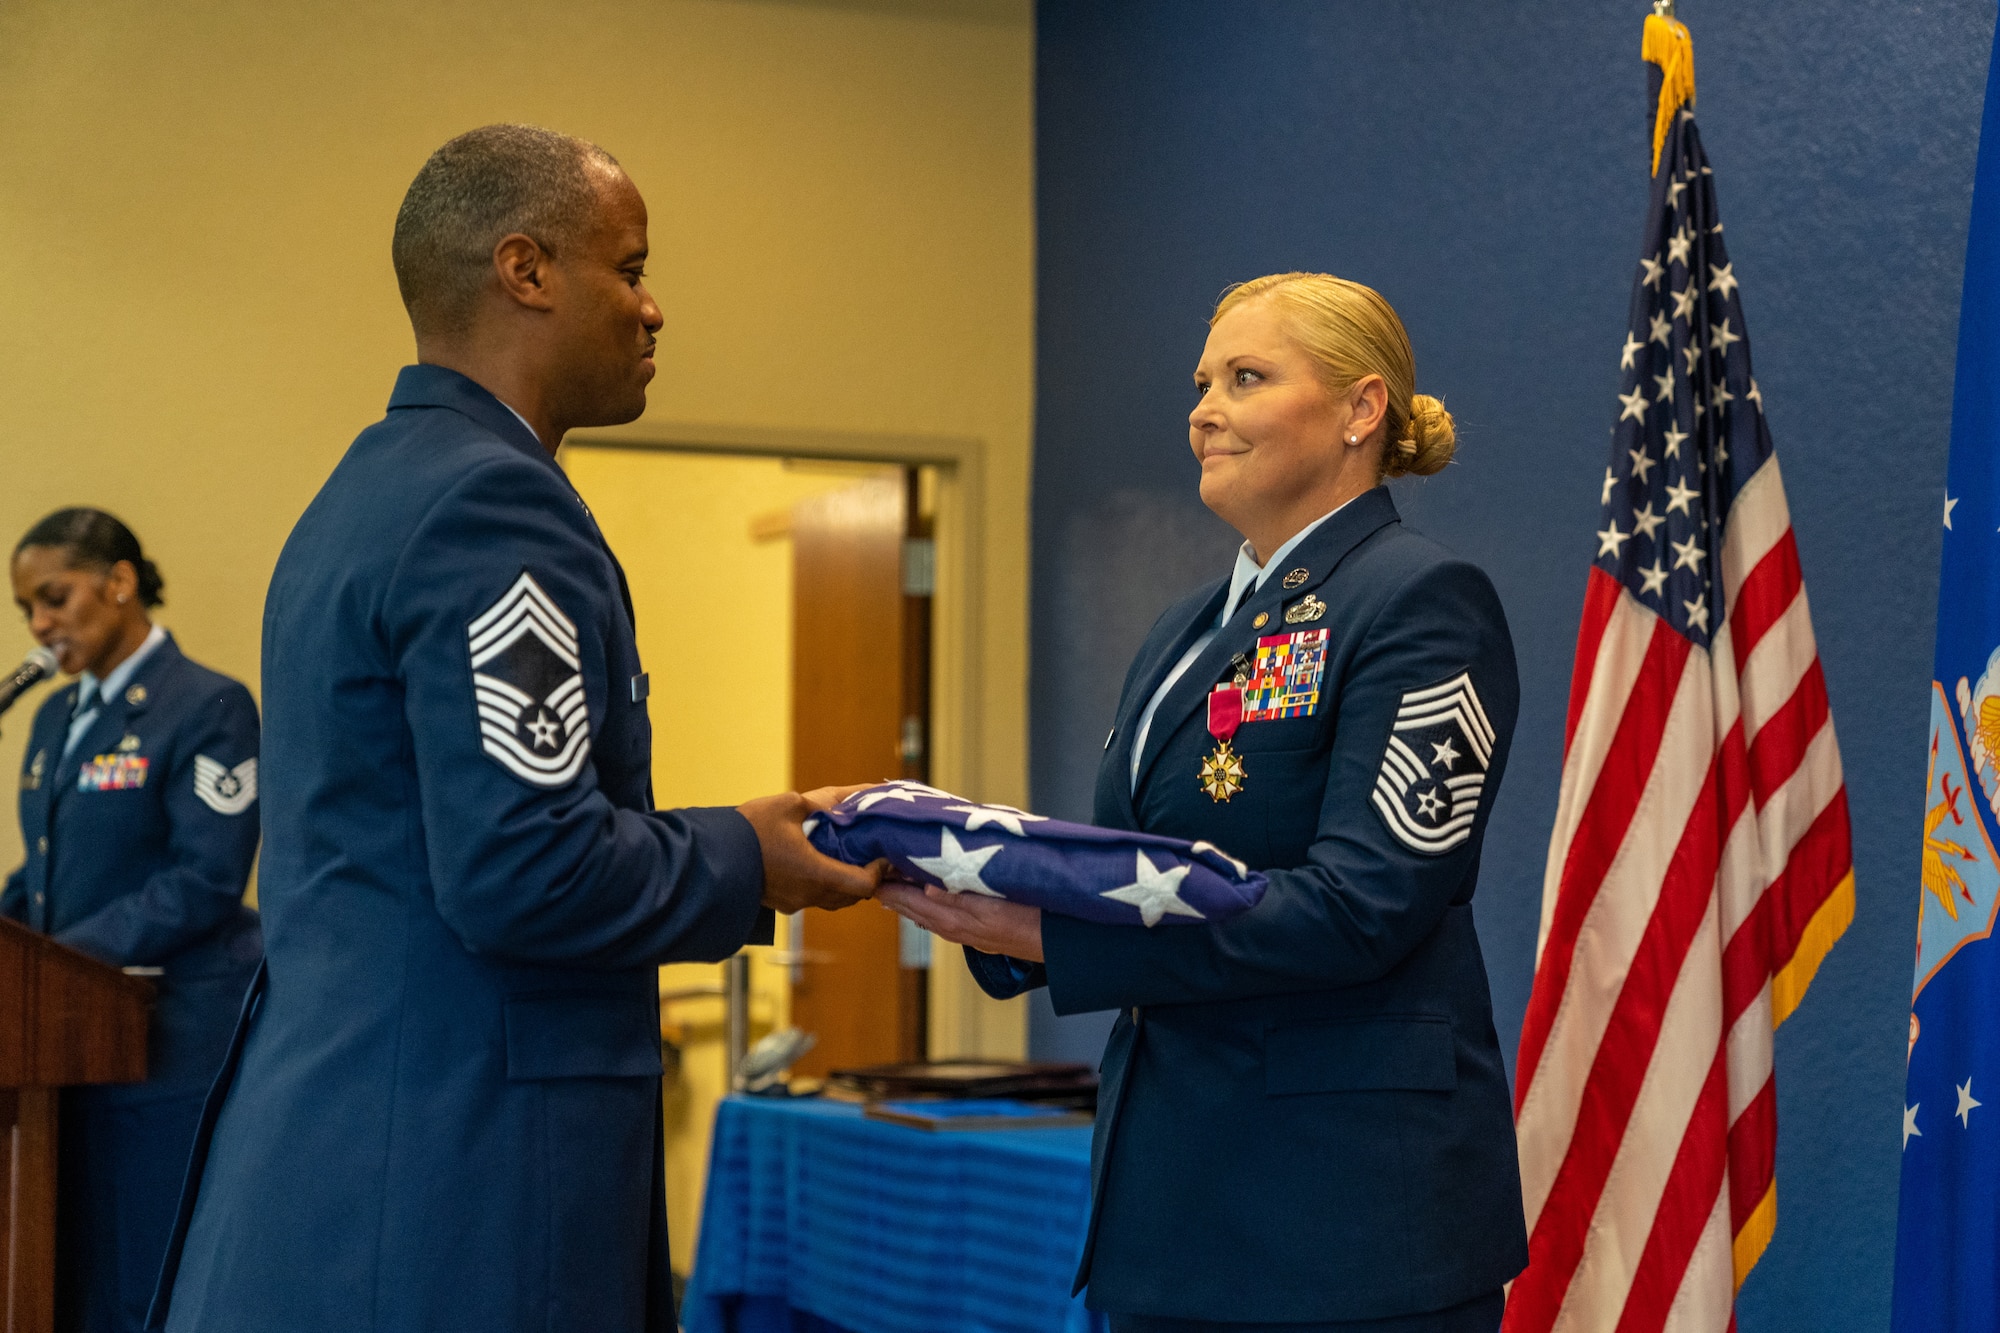 U.S. Air Force Chief Master Sgt. Marlon Jackson, Second Air Force senior enlisted leader, passes the National Colors to Chief Master Sgt. Sarah Esparza, 81st Training Wing command chief master sergeant, during her retirement ceremony at Keesler Air Force Base, Mississippi, June 1, 2023.